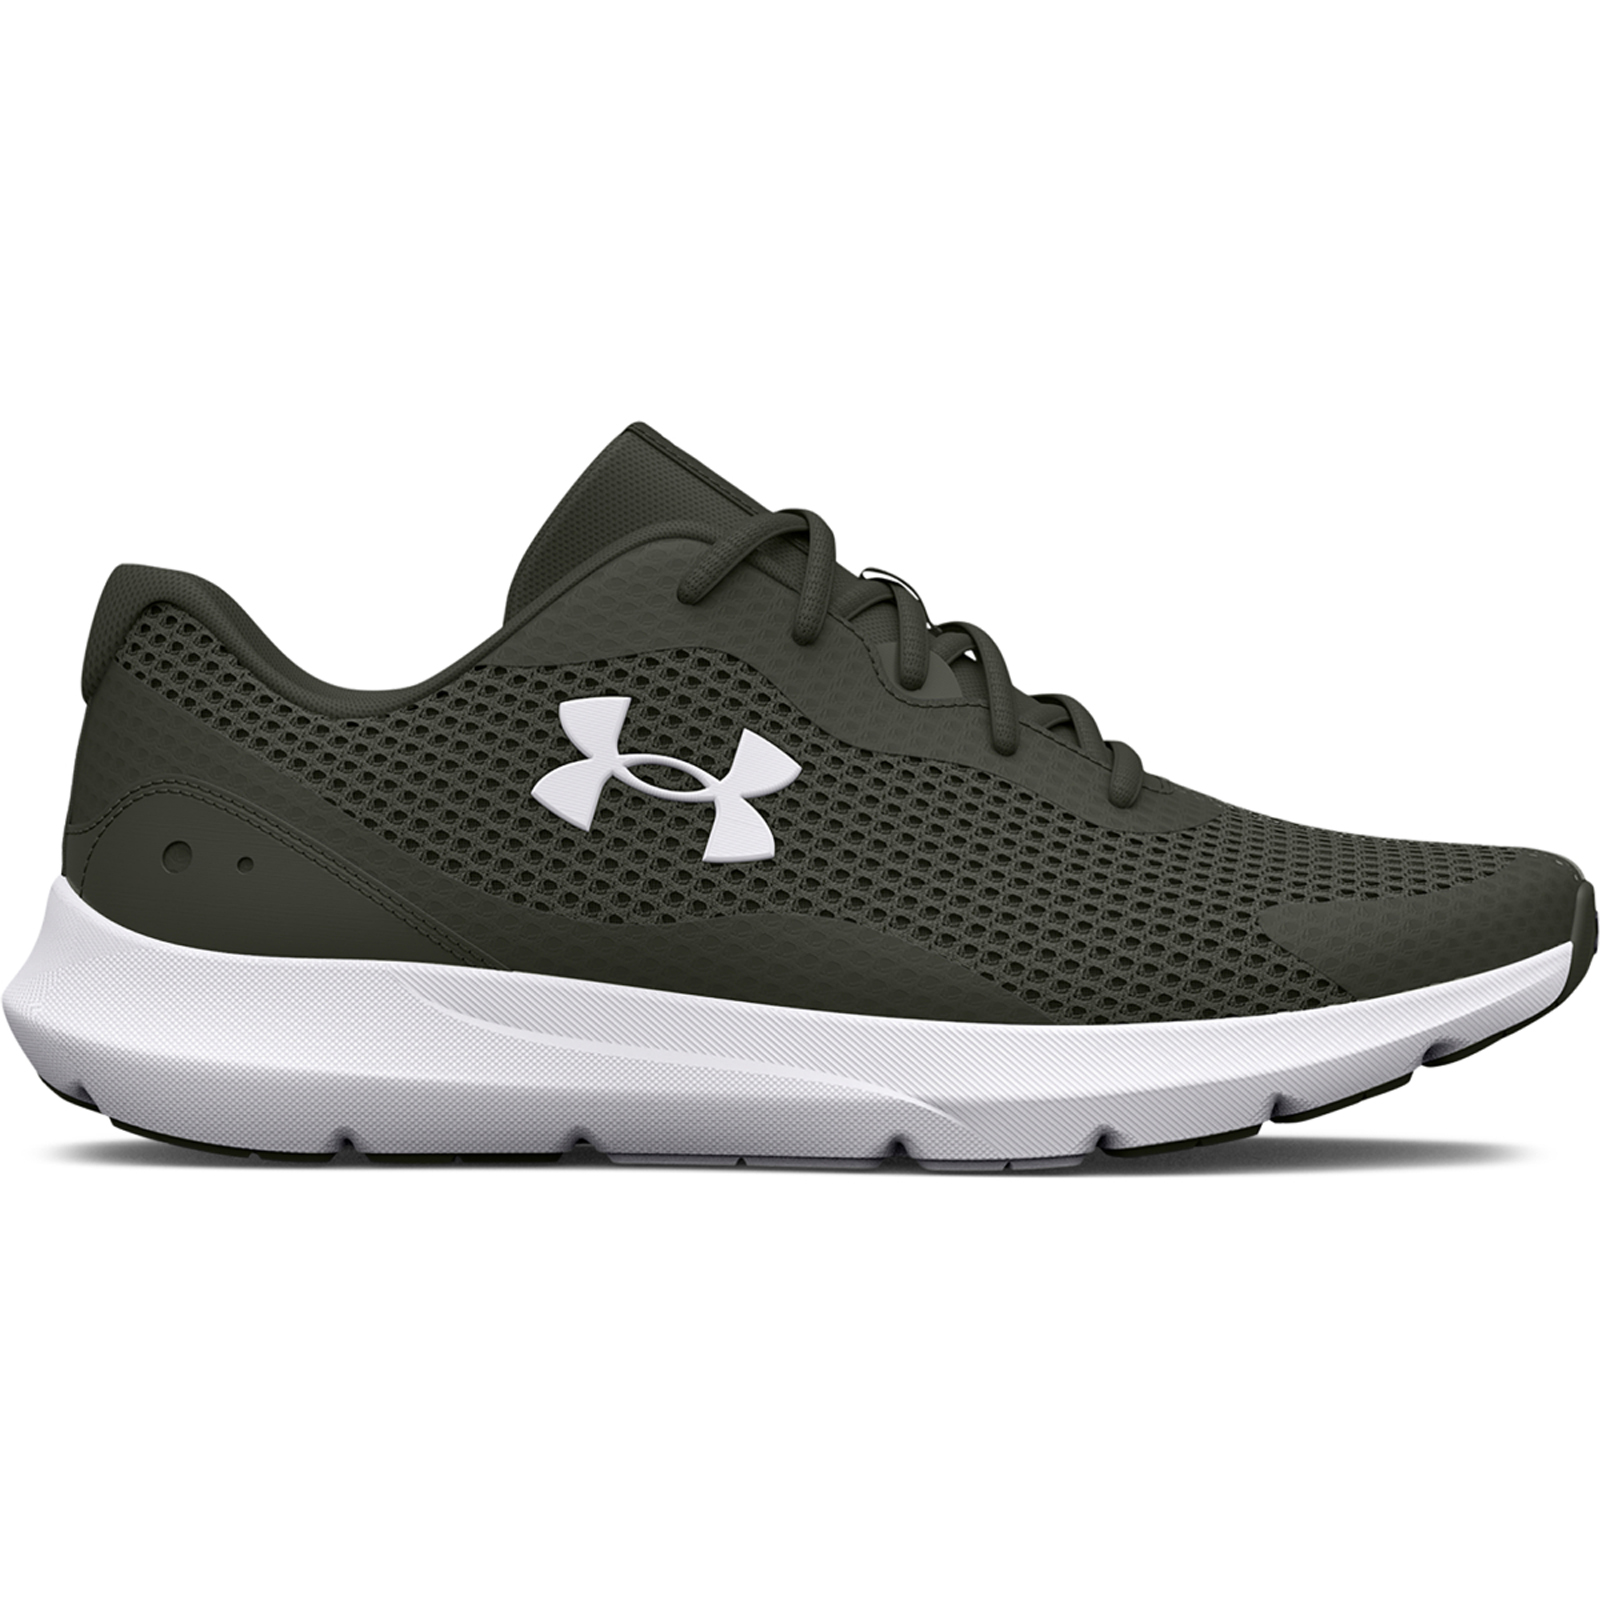 Under Armour - 3024883 Men's UA Surge 3 Running Shoes - 302/X7X7 Ανδρικά > Παπούτσια > Αθλητικά > Παπούτσι Low Cut